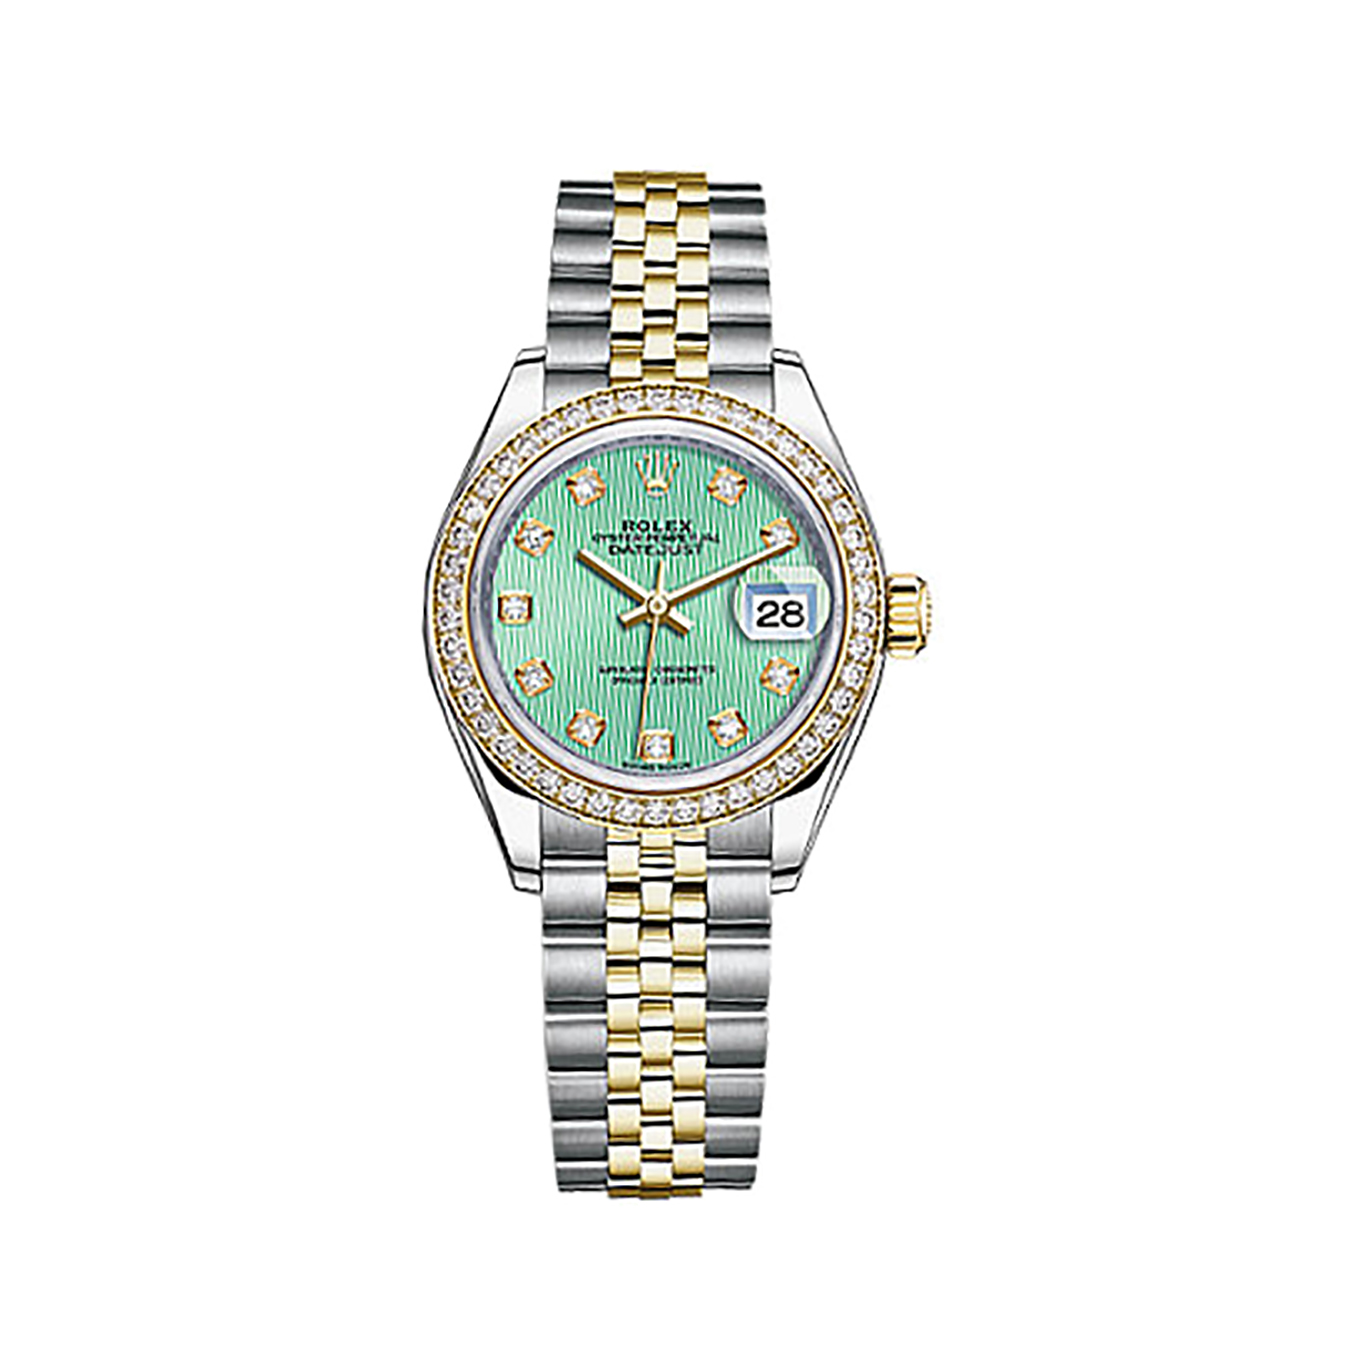 Lady-Datejust 28 279383RBR Gold & Stainless Steel & Diamonds Watch (Mint Green Set with Diamonds)